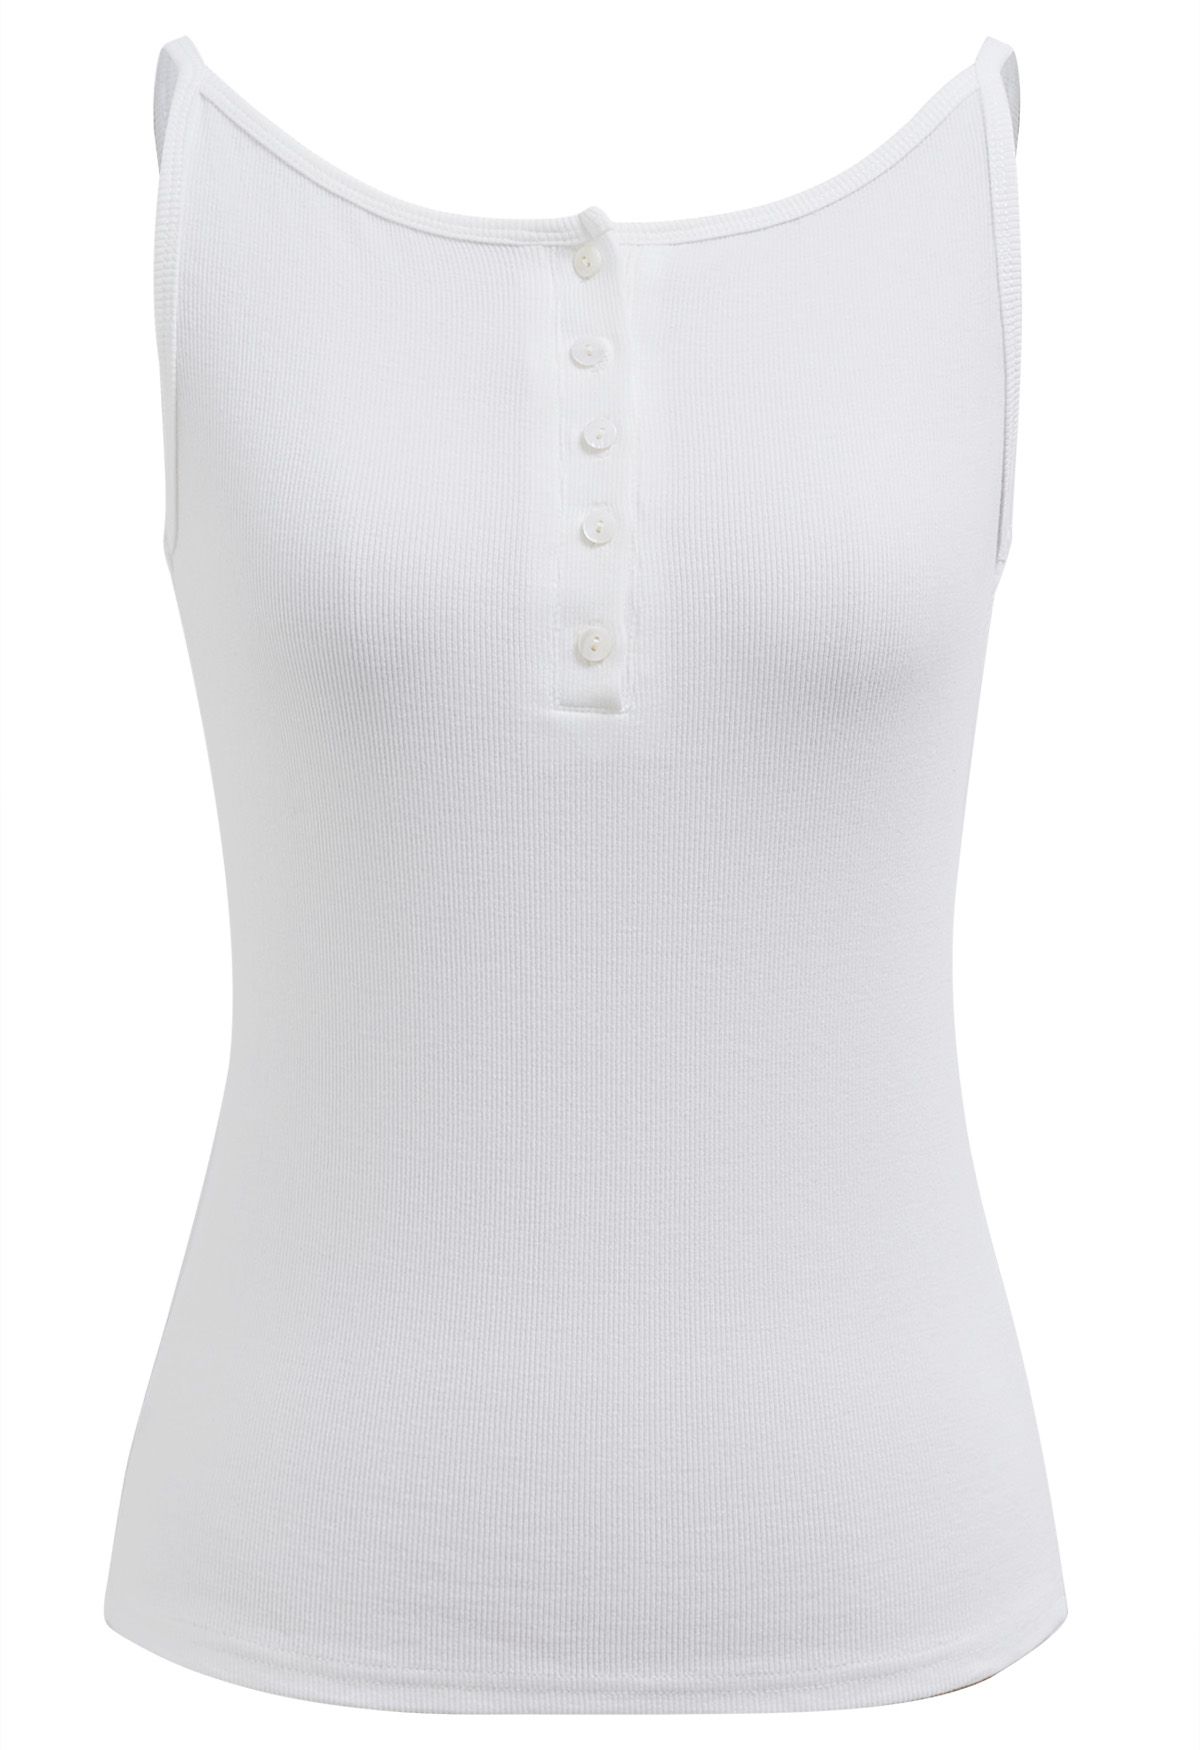 Simplicity Front Buttoned Cami Top in White